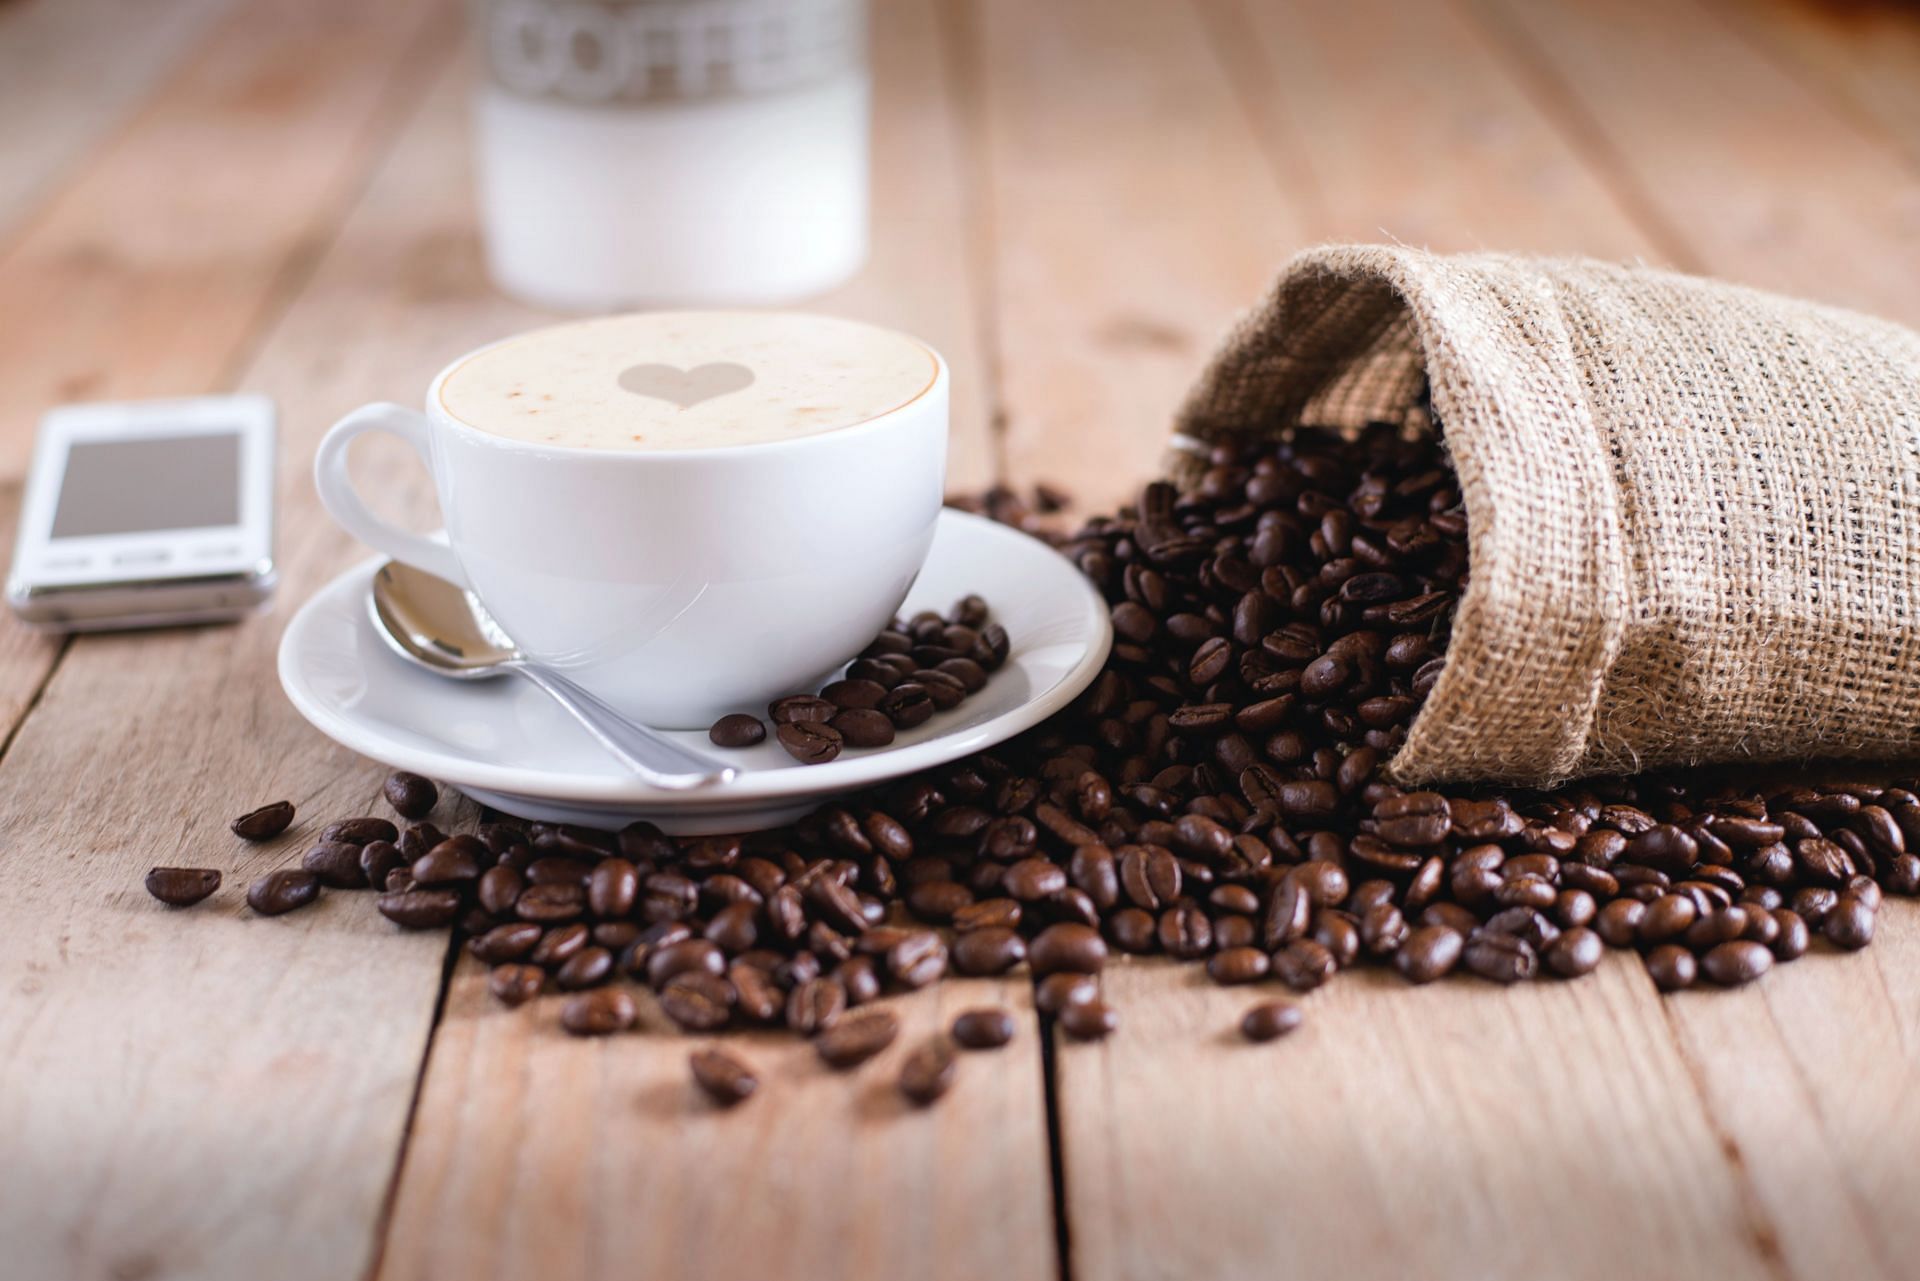 Coffee is one of the most popular beverages in the world (Image via Unsplash/Mike Kenneally)